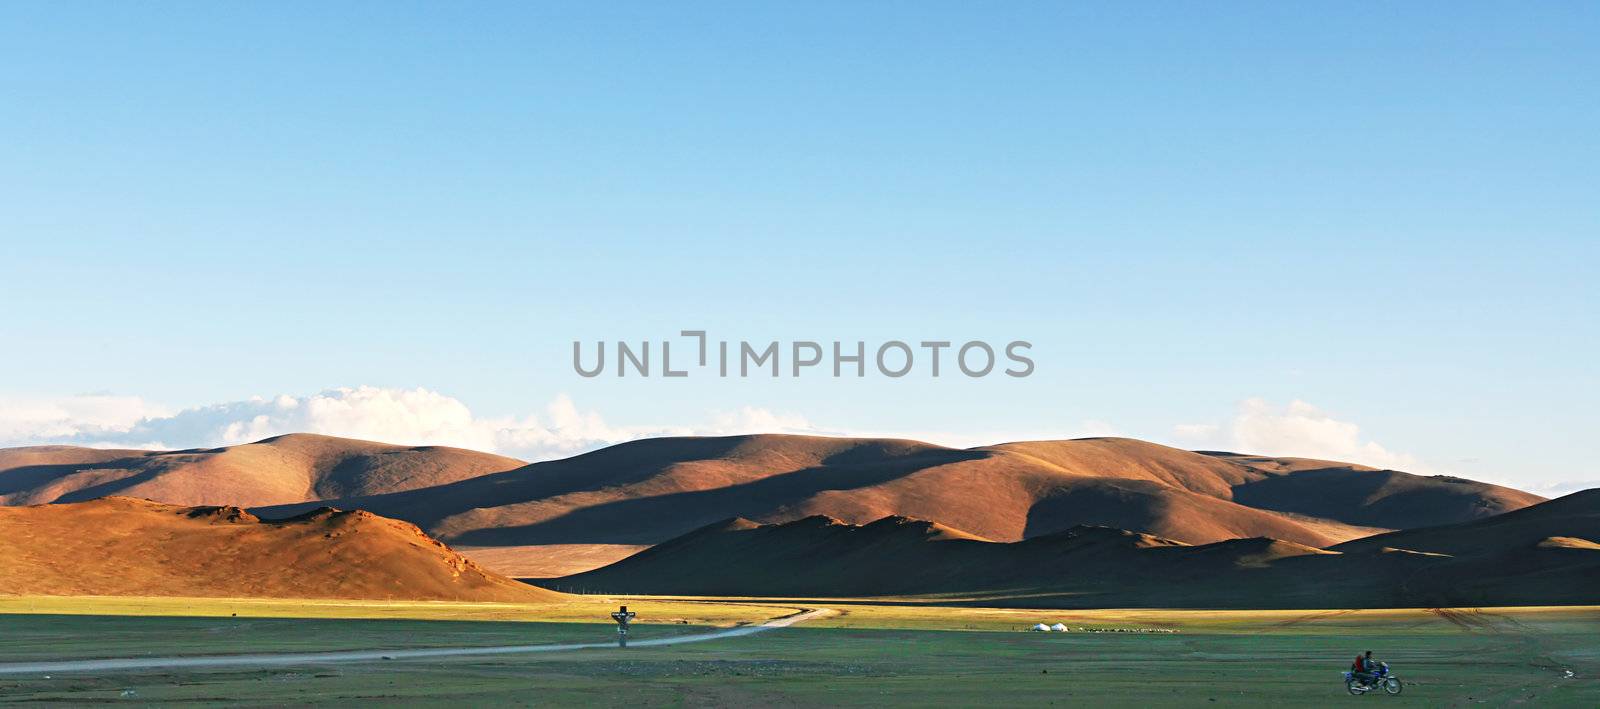 Traditional Mongolian landscape in the sunset